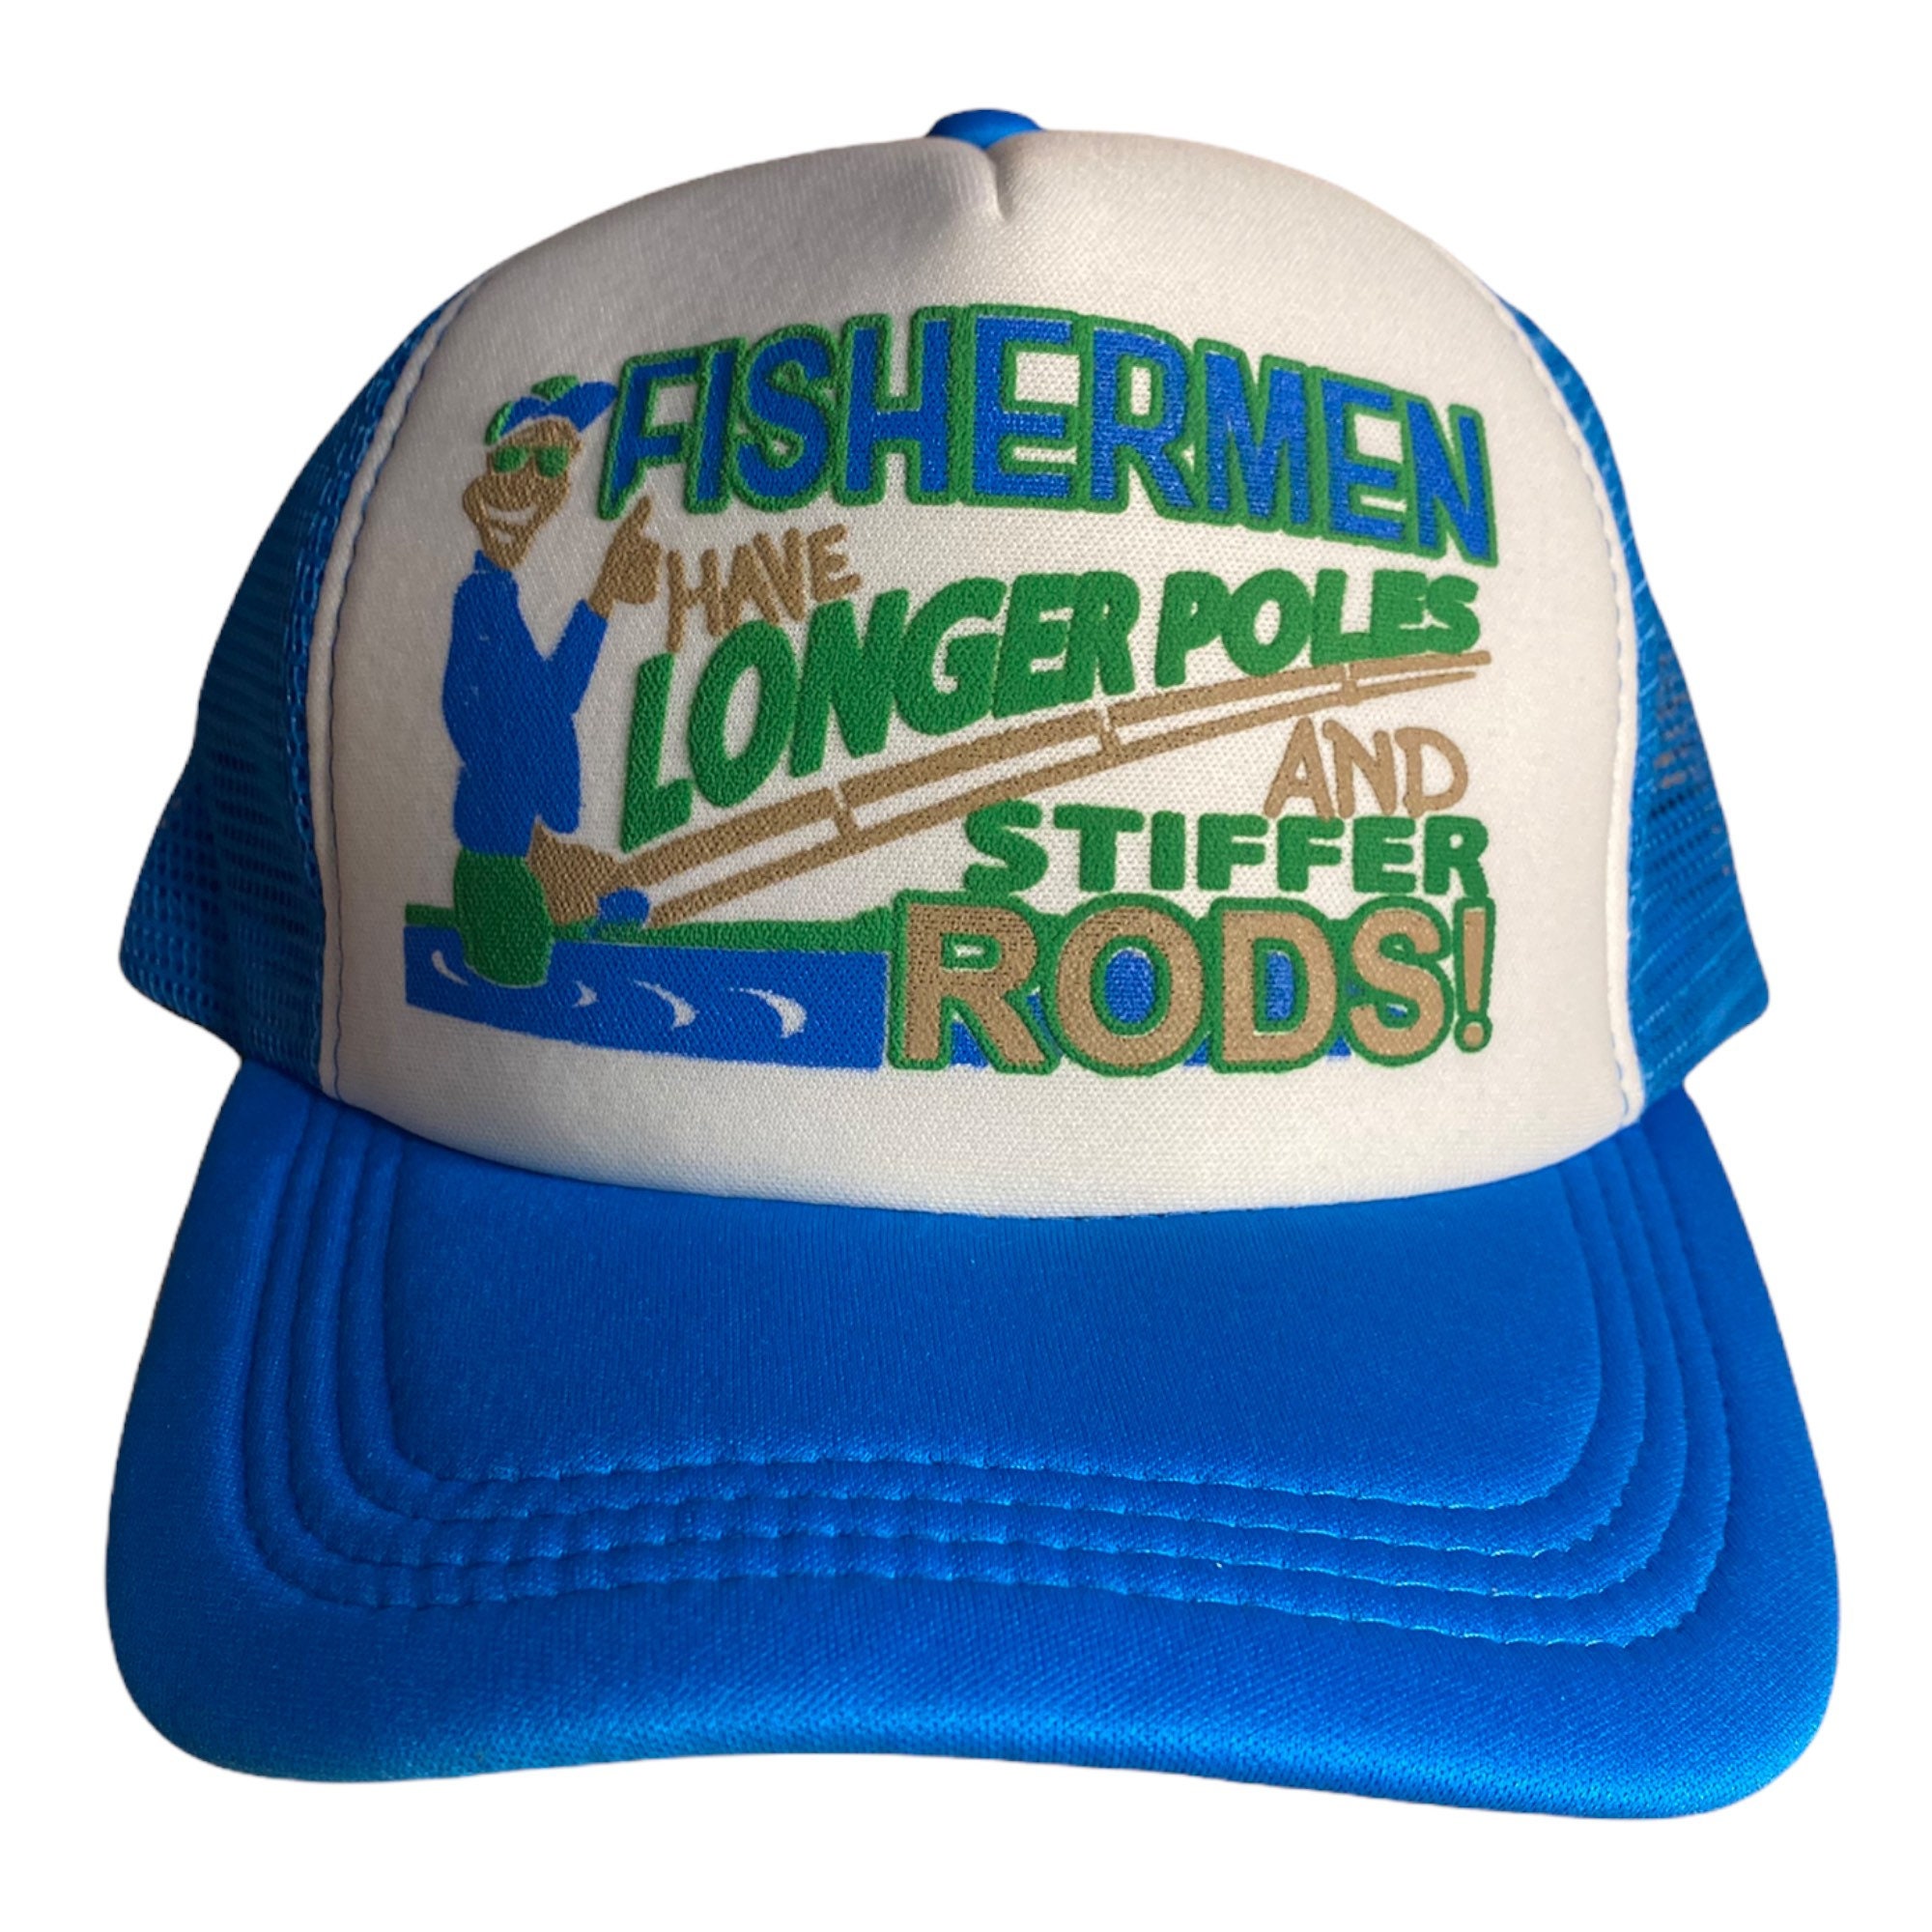 Vintage Fishing Hat // Fisherman Have Longer Poles and Stiffer Rods //  Funny Fishing Hat // Trucker Hat // Two Tone Snapback Fish Boating -   Denmark